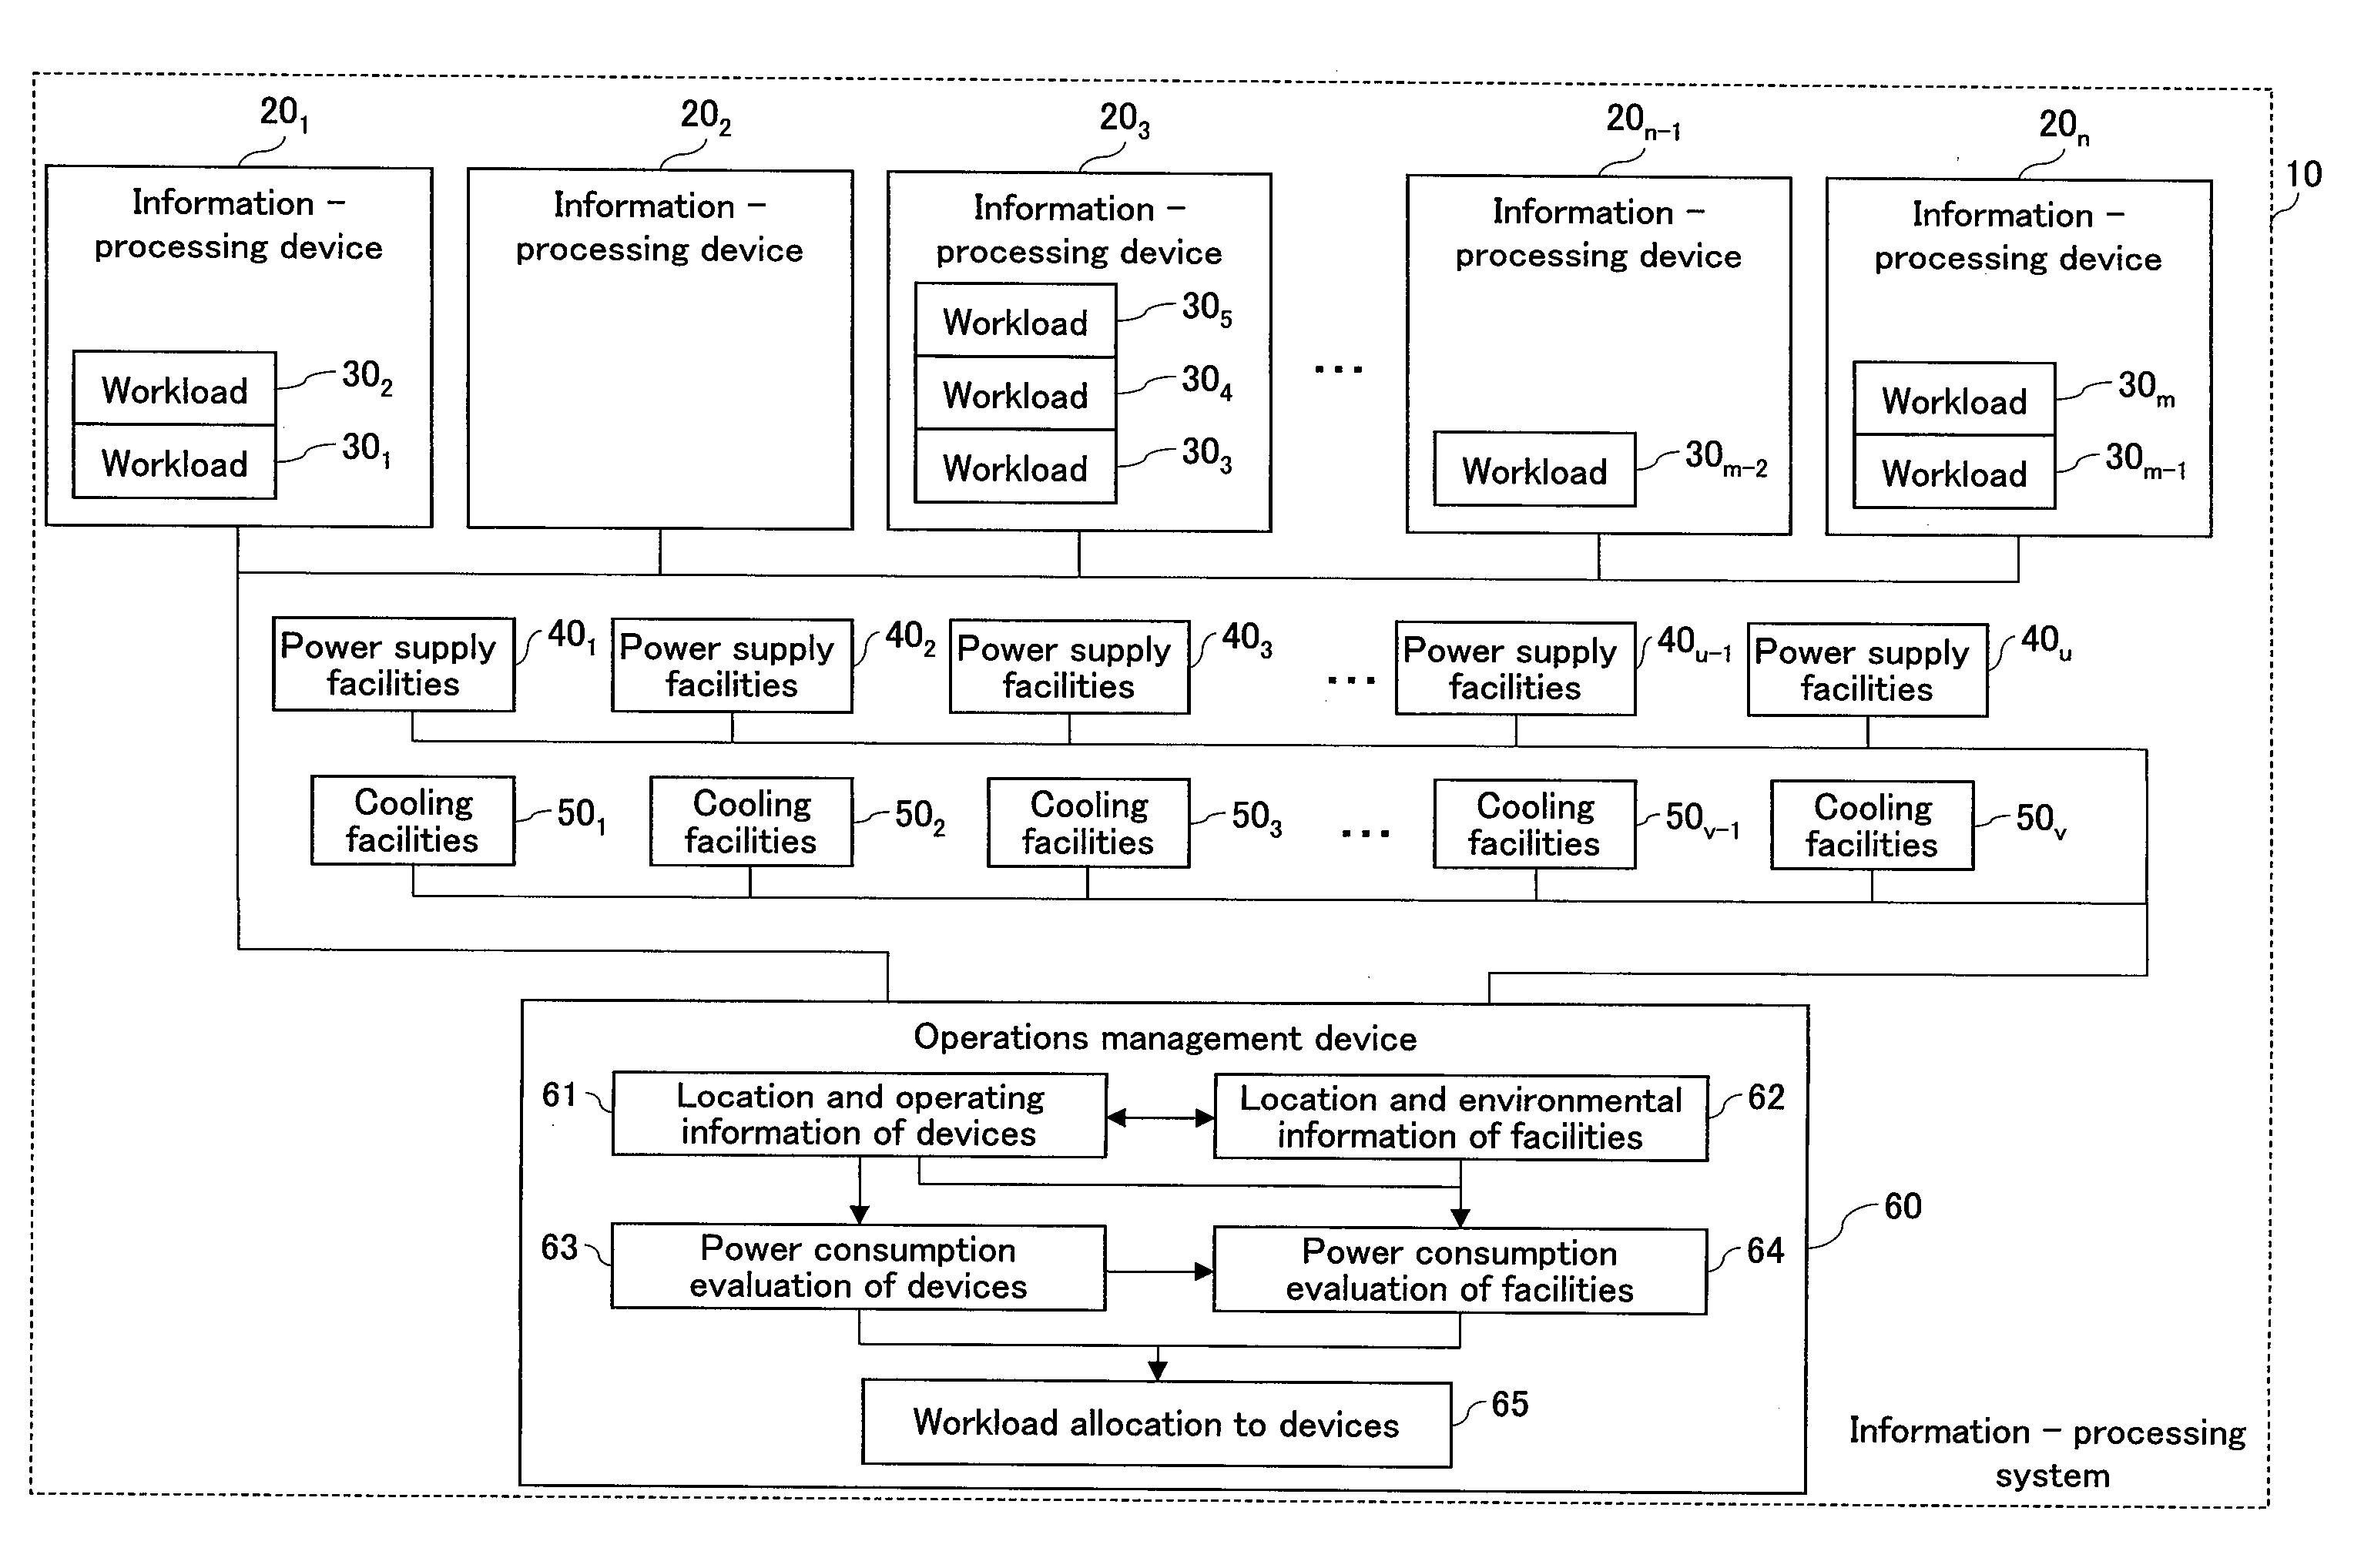 Operations management methods and devices thereof in information-processing systems